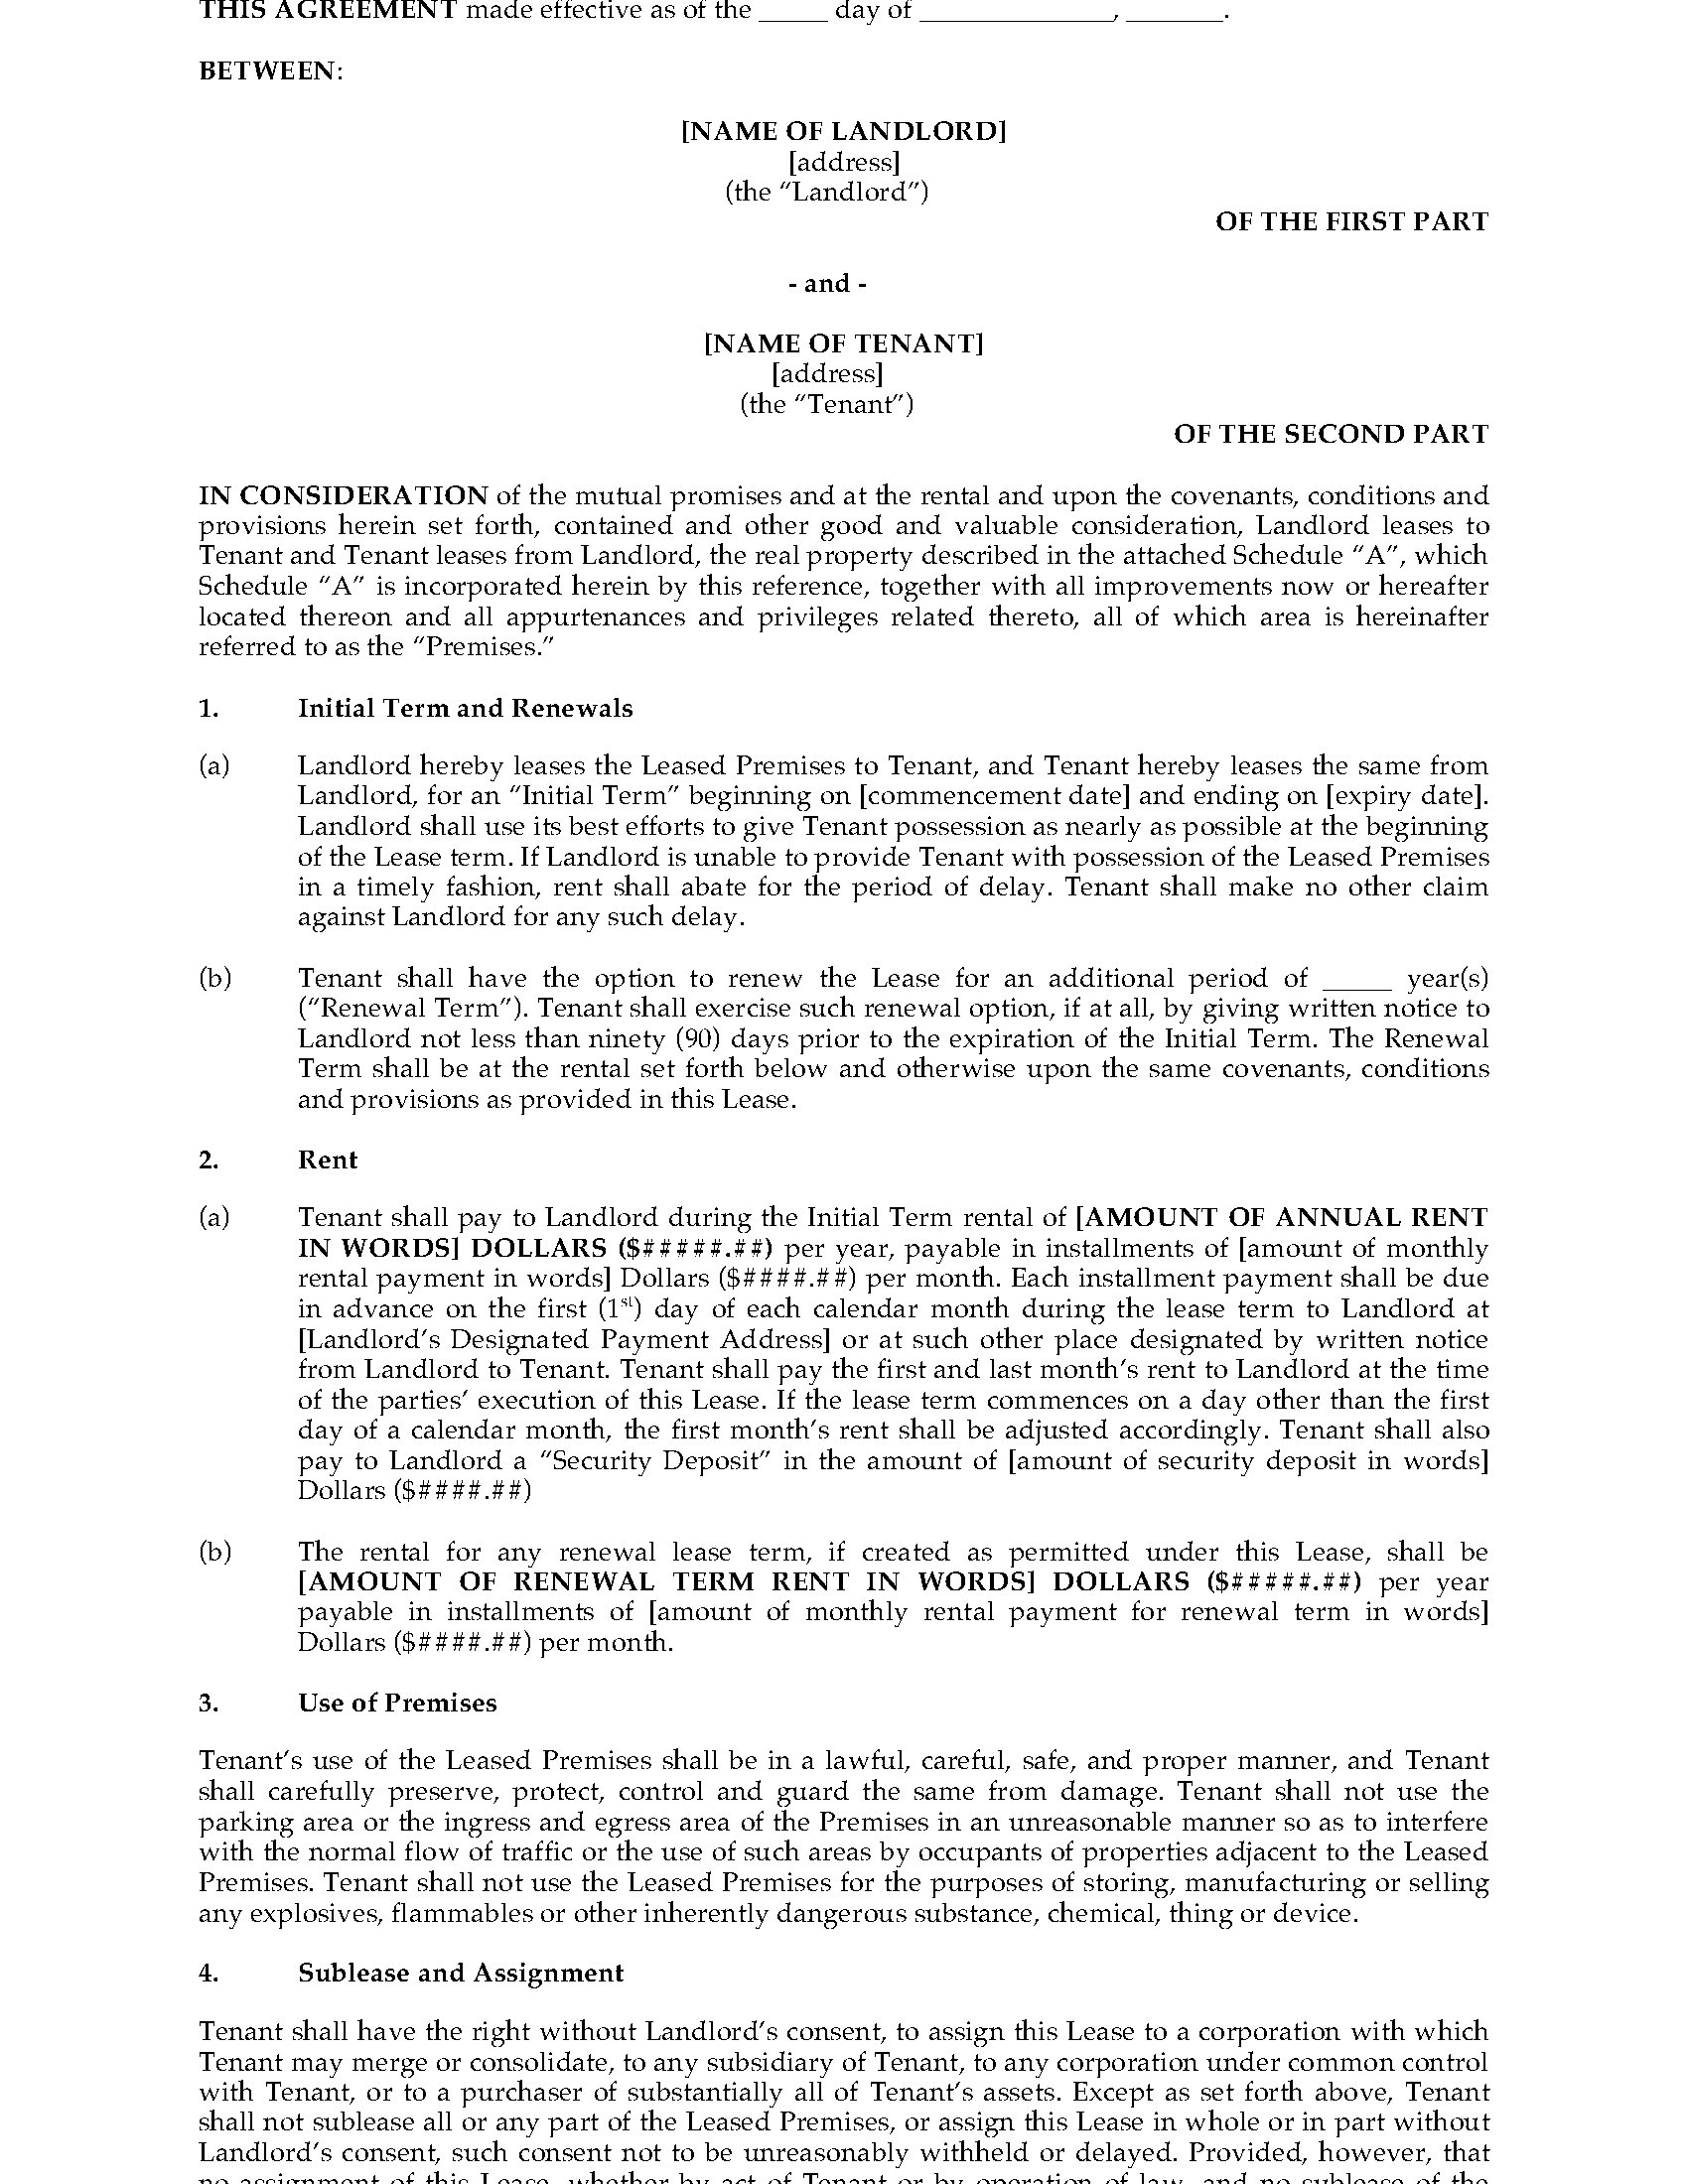 georgia-commercial-lease-agreement-legal-forms-and-business-templates